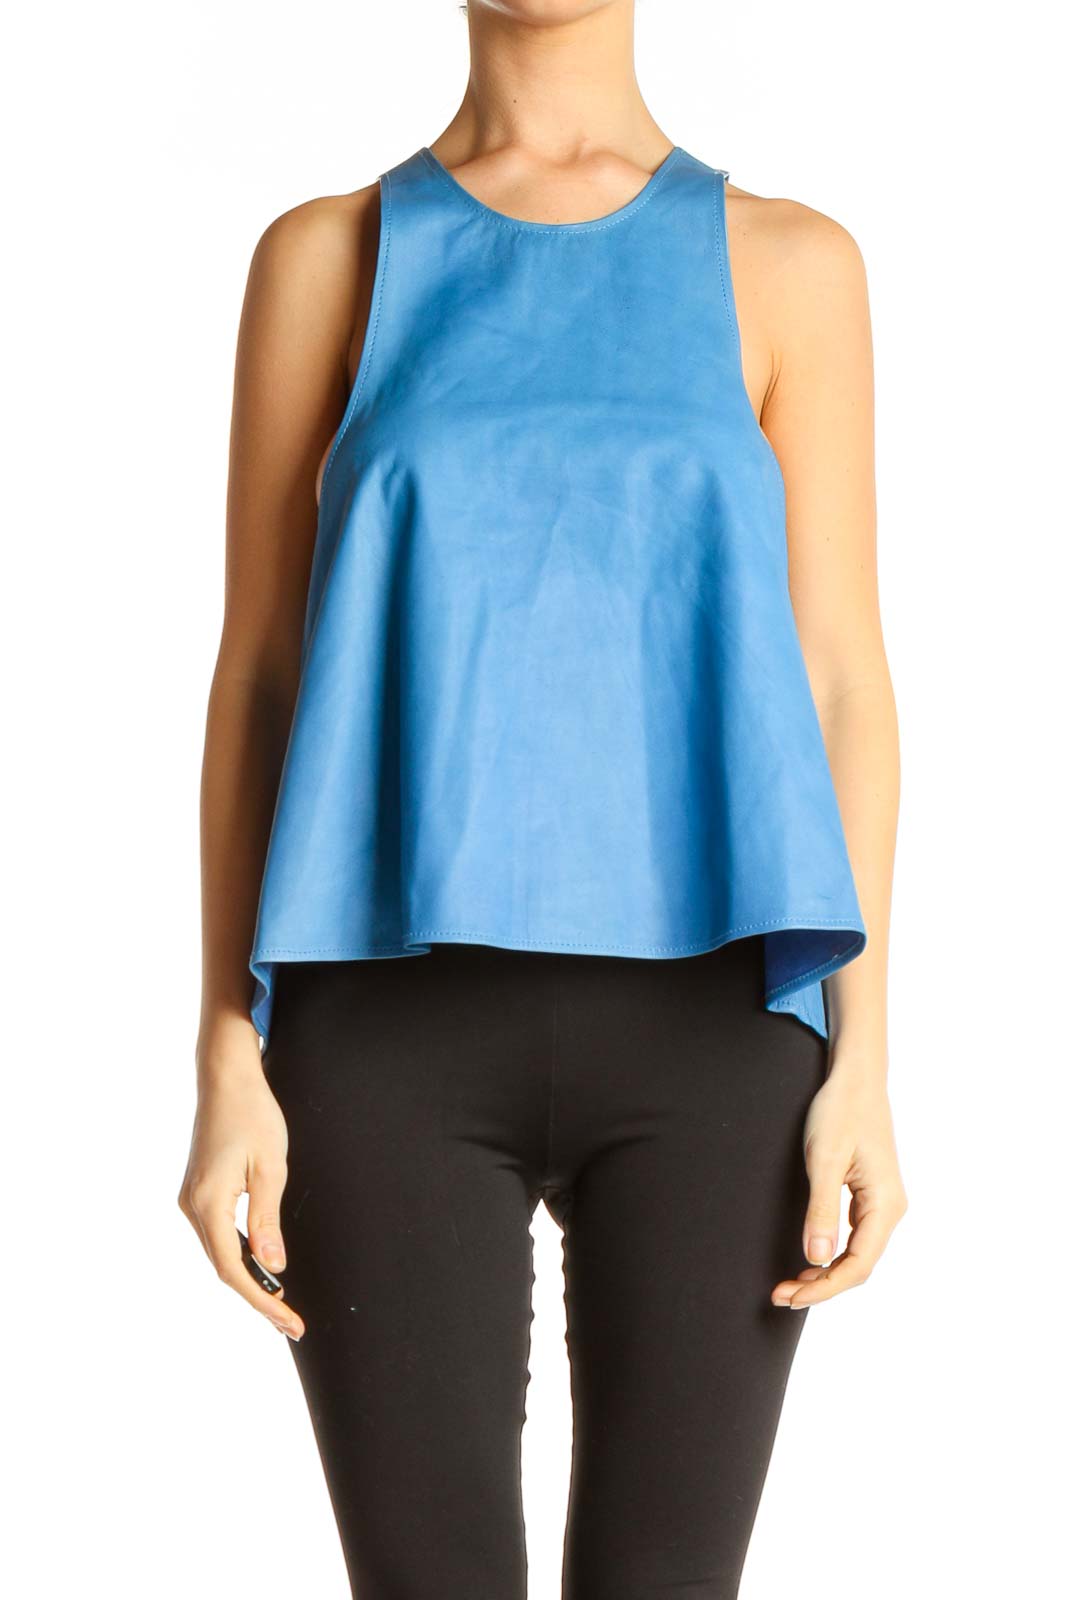 Blue Chic Top Front